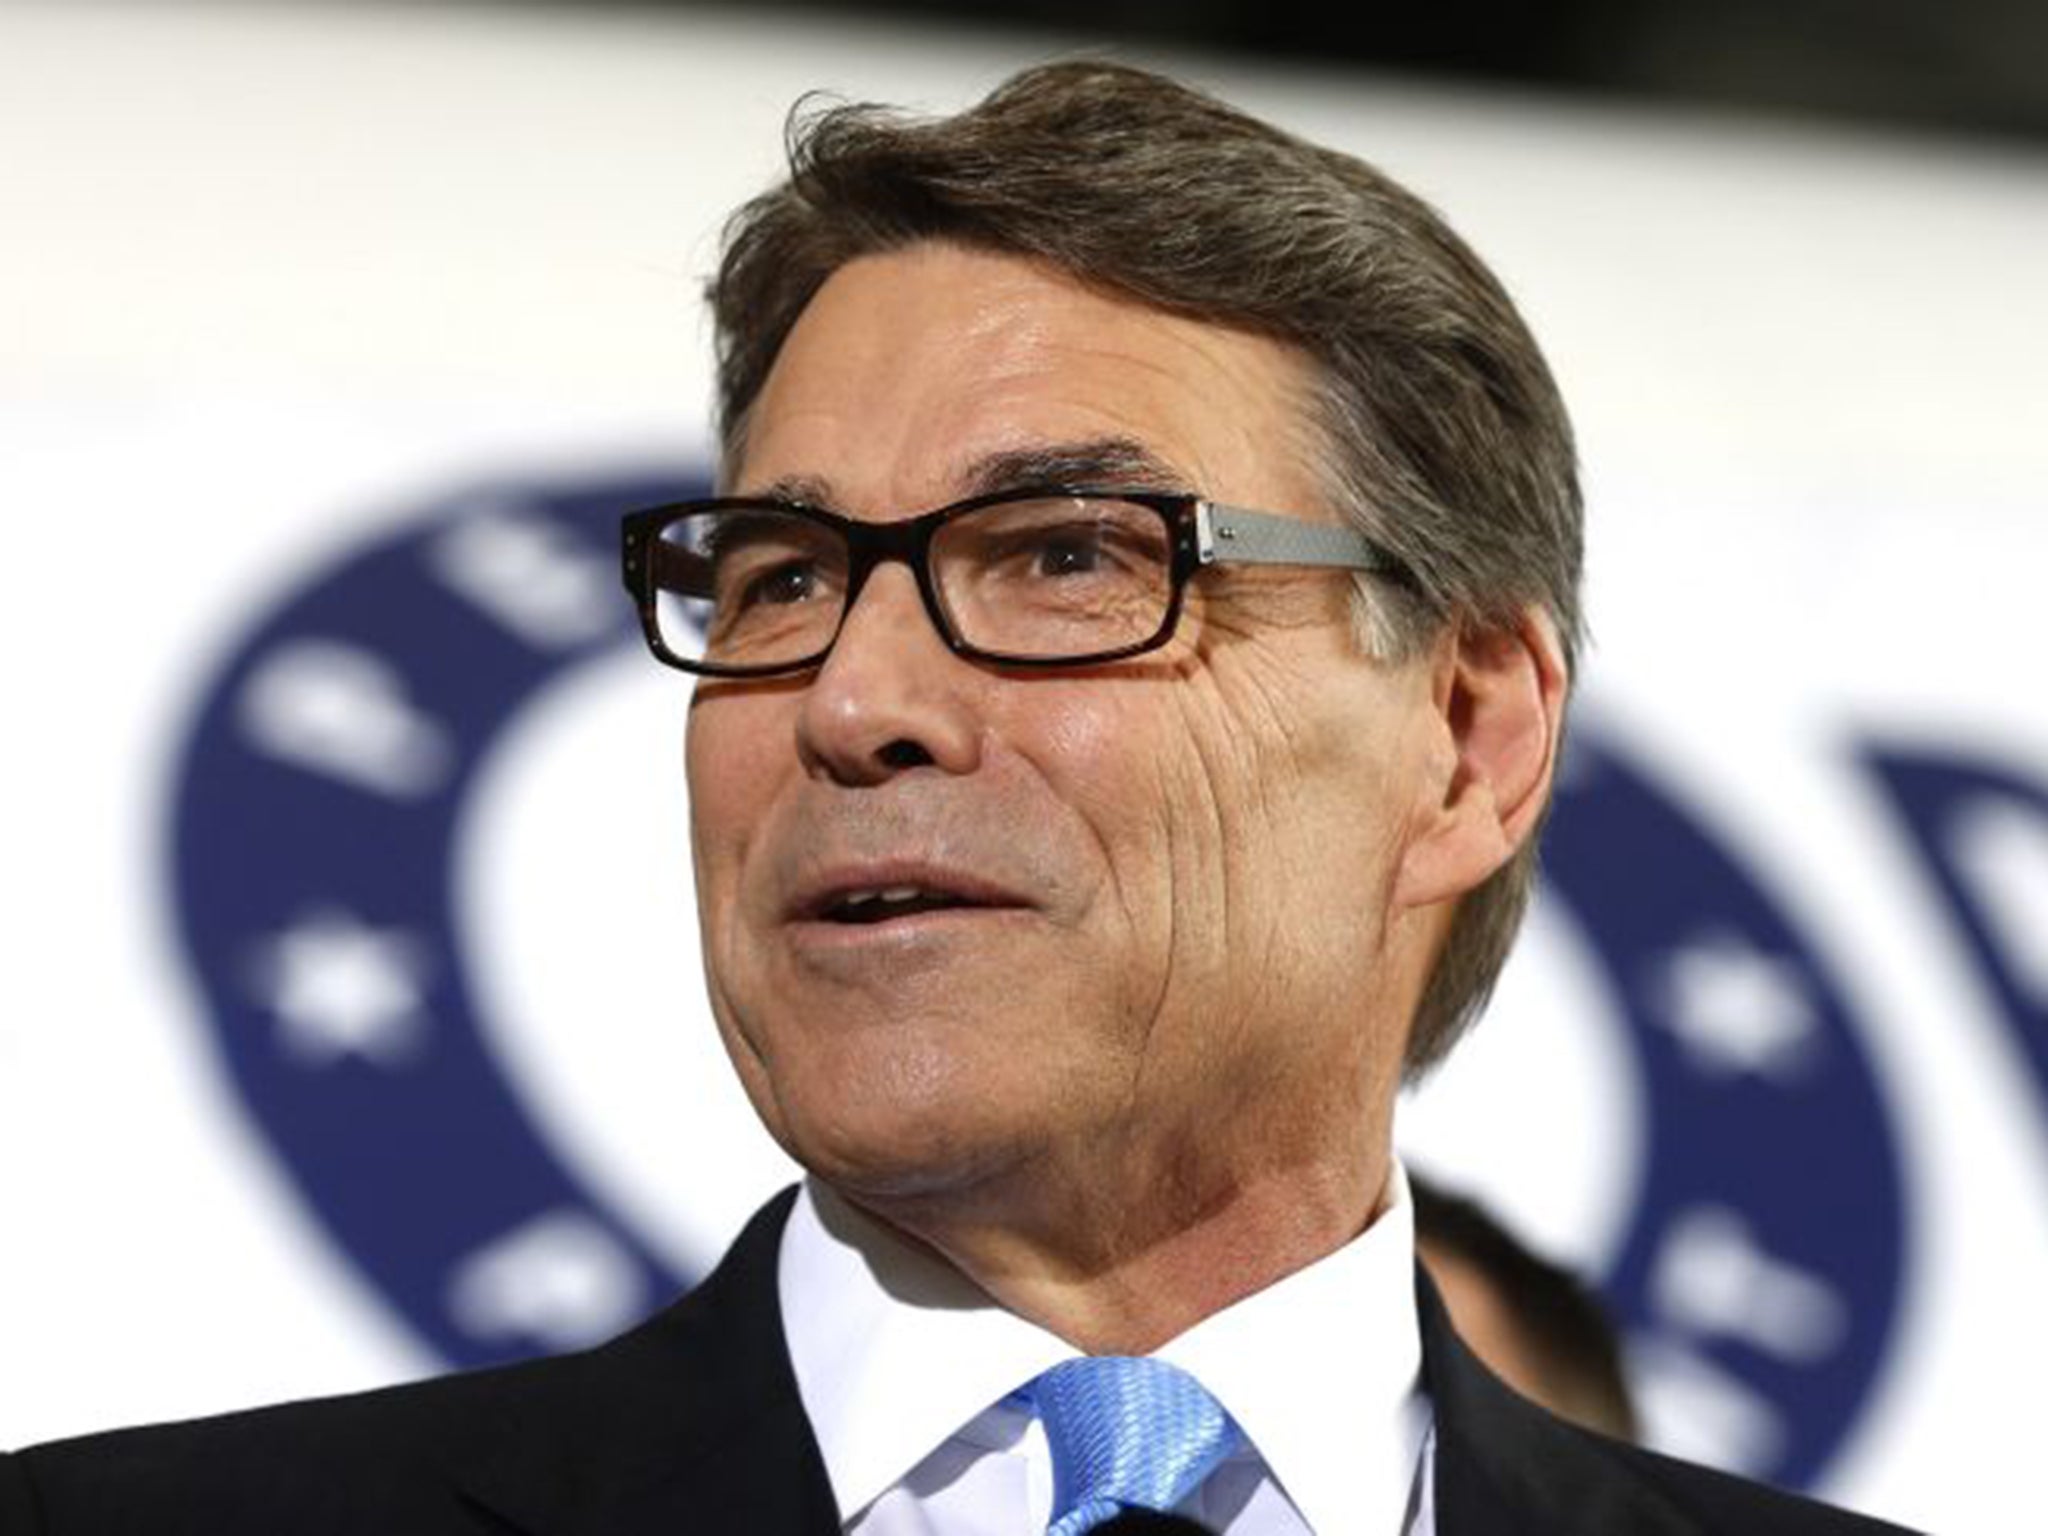 Rick Perry was leading the 2012 race until he forgot the name of a department he wanted to abolish